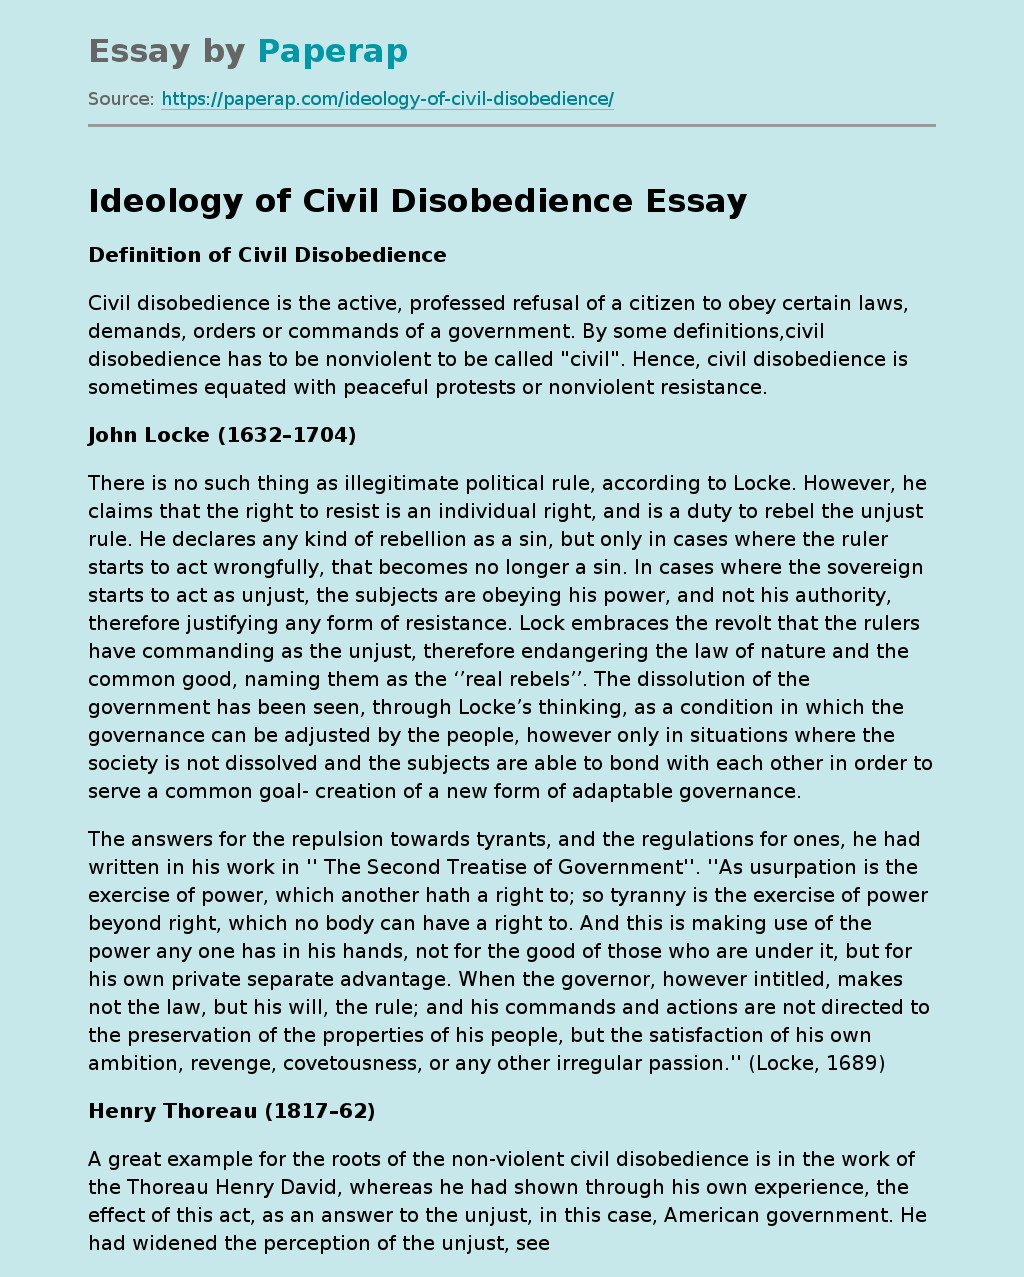 Ideology of Civil Disobedience